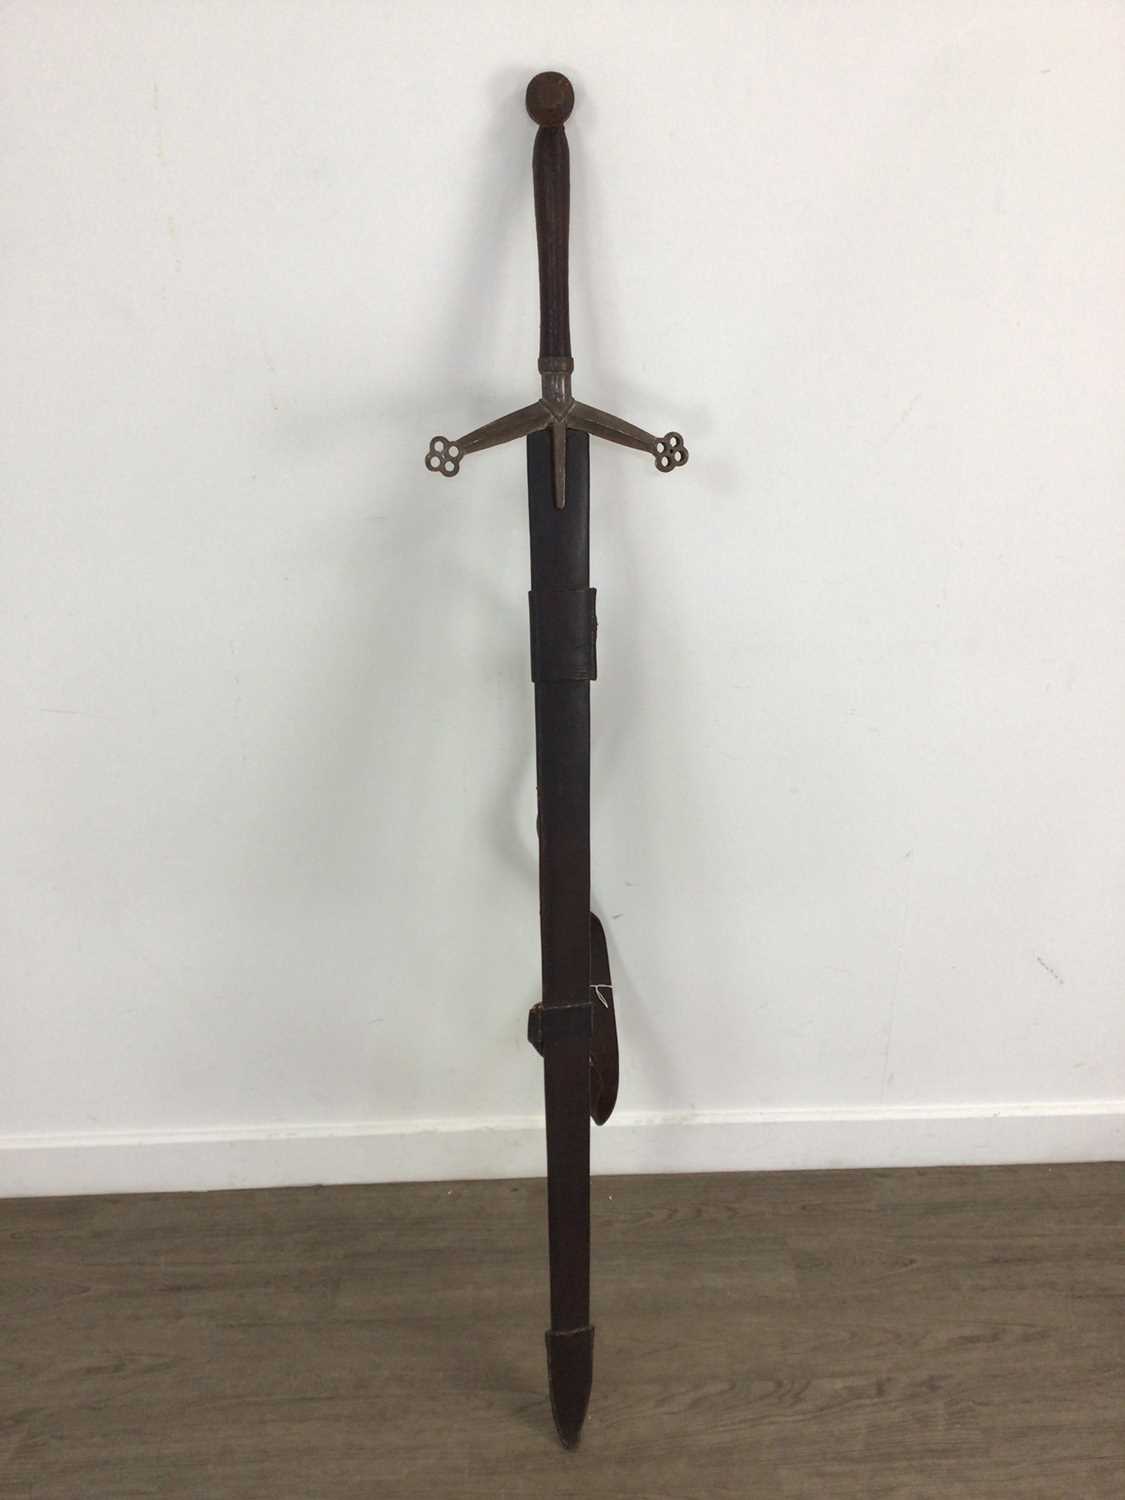 SCOTTISH CLAYMORE SWORD, ALONG WITH A LEATHER BUCKLER SHIELD - Image 2 of 9